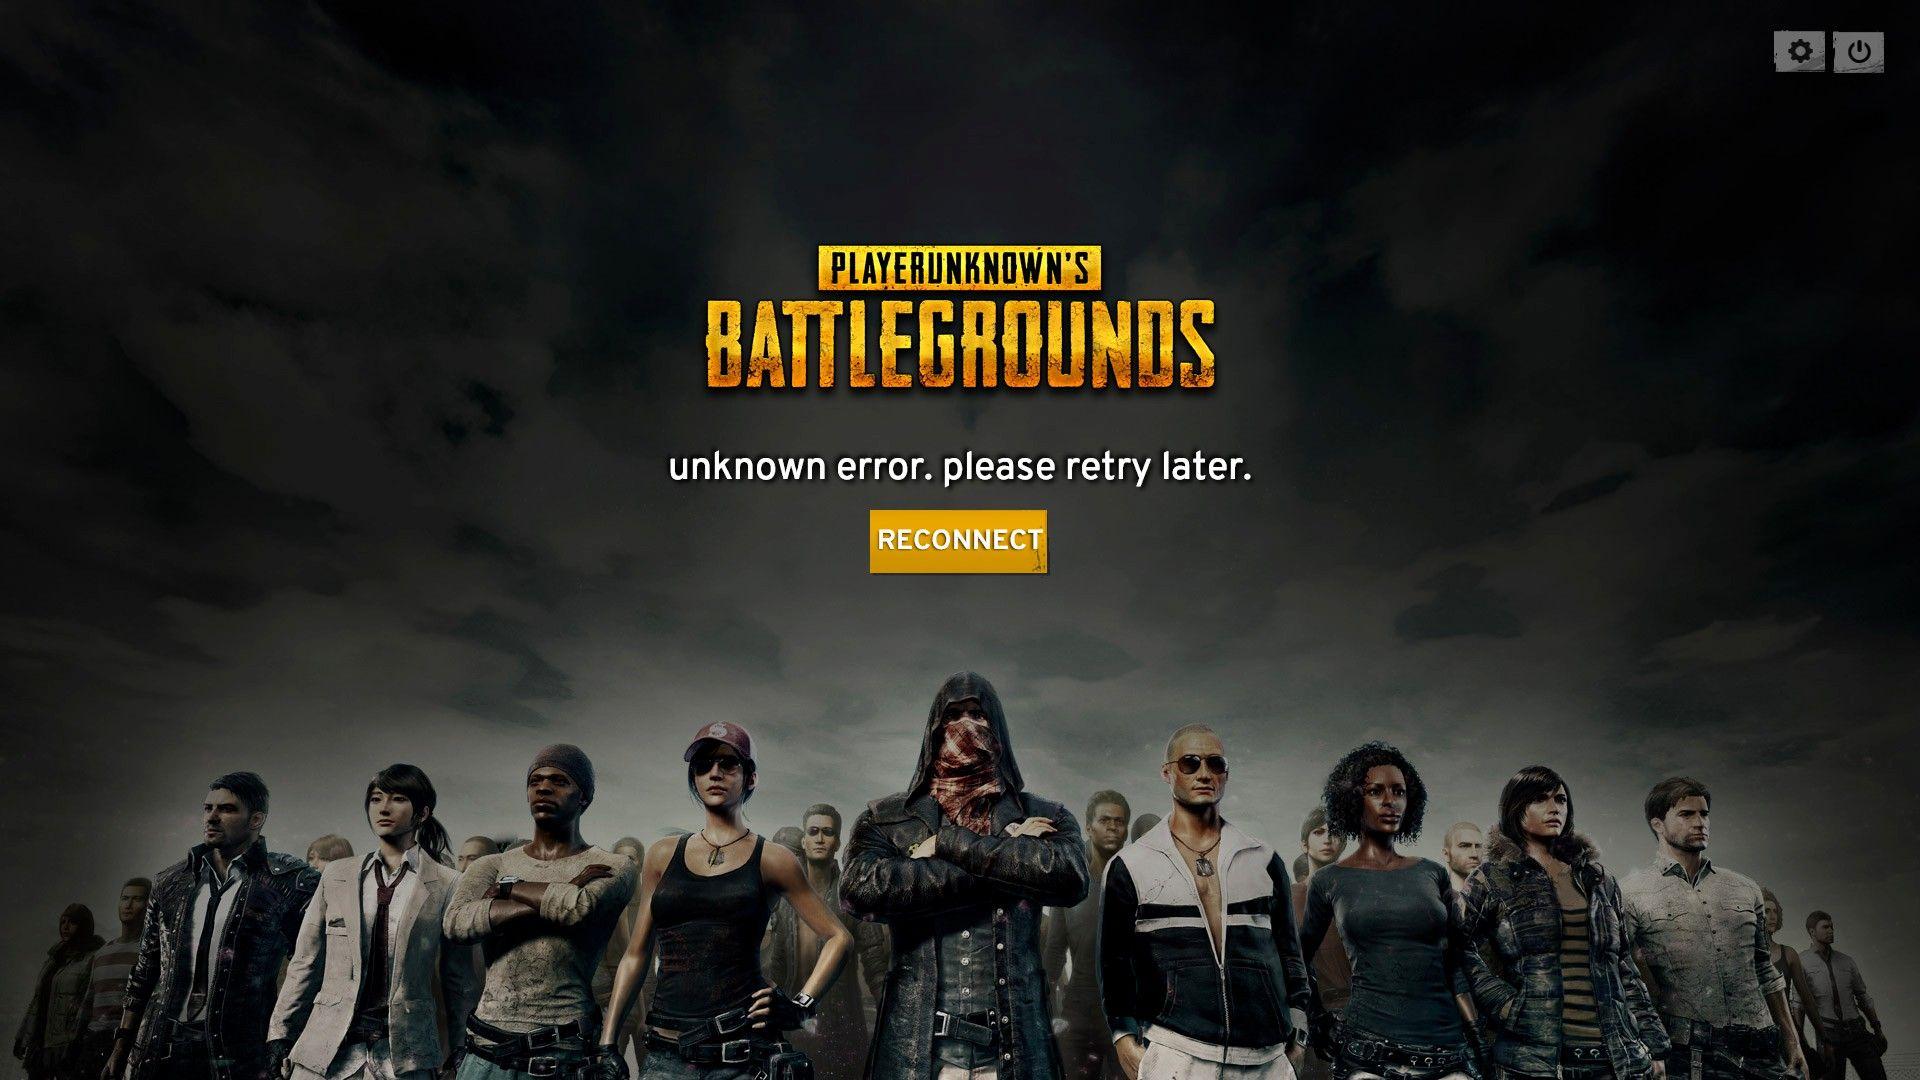 PLAYERUNKNOWN'S BATTLEGROUNDS Wallpaper, Picture, Image